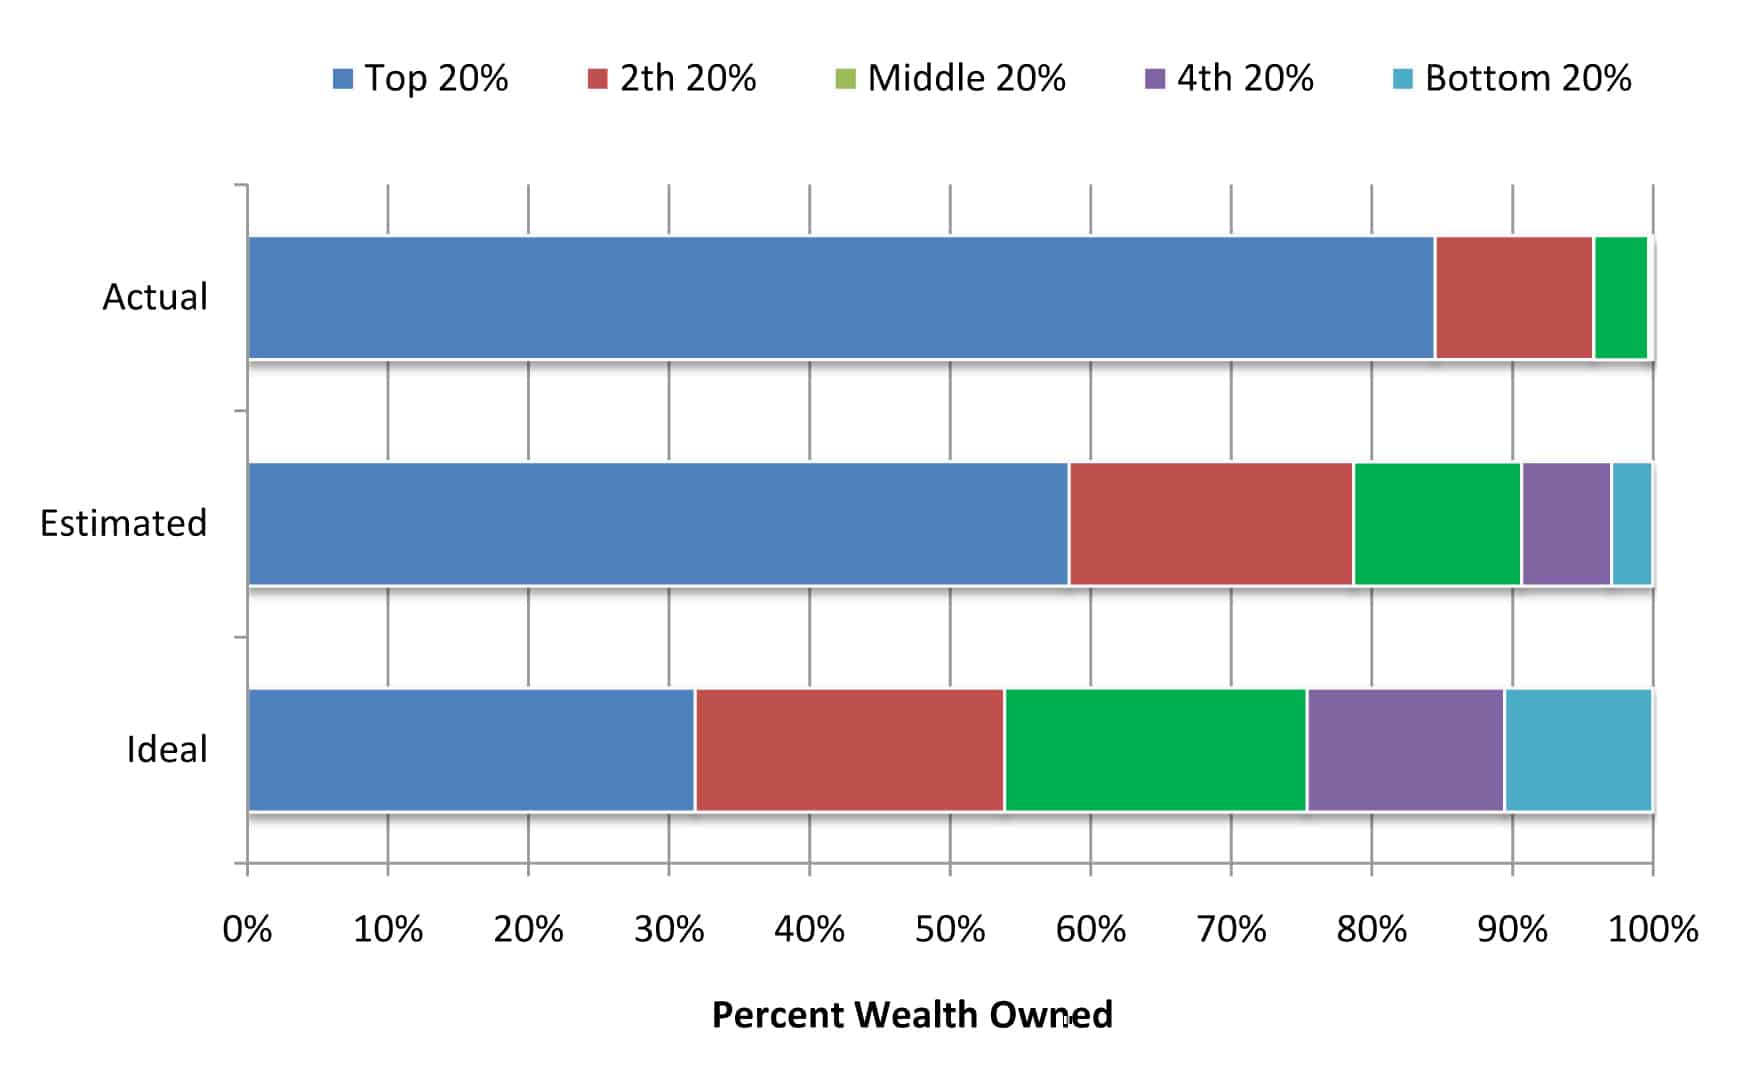 Percent Wealth Owned